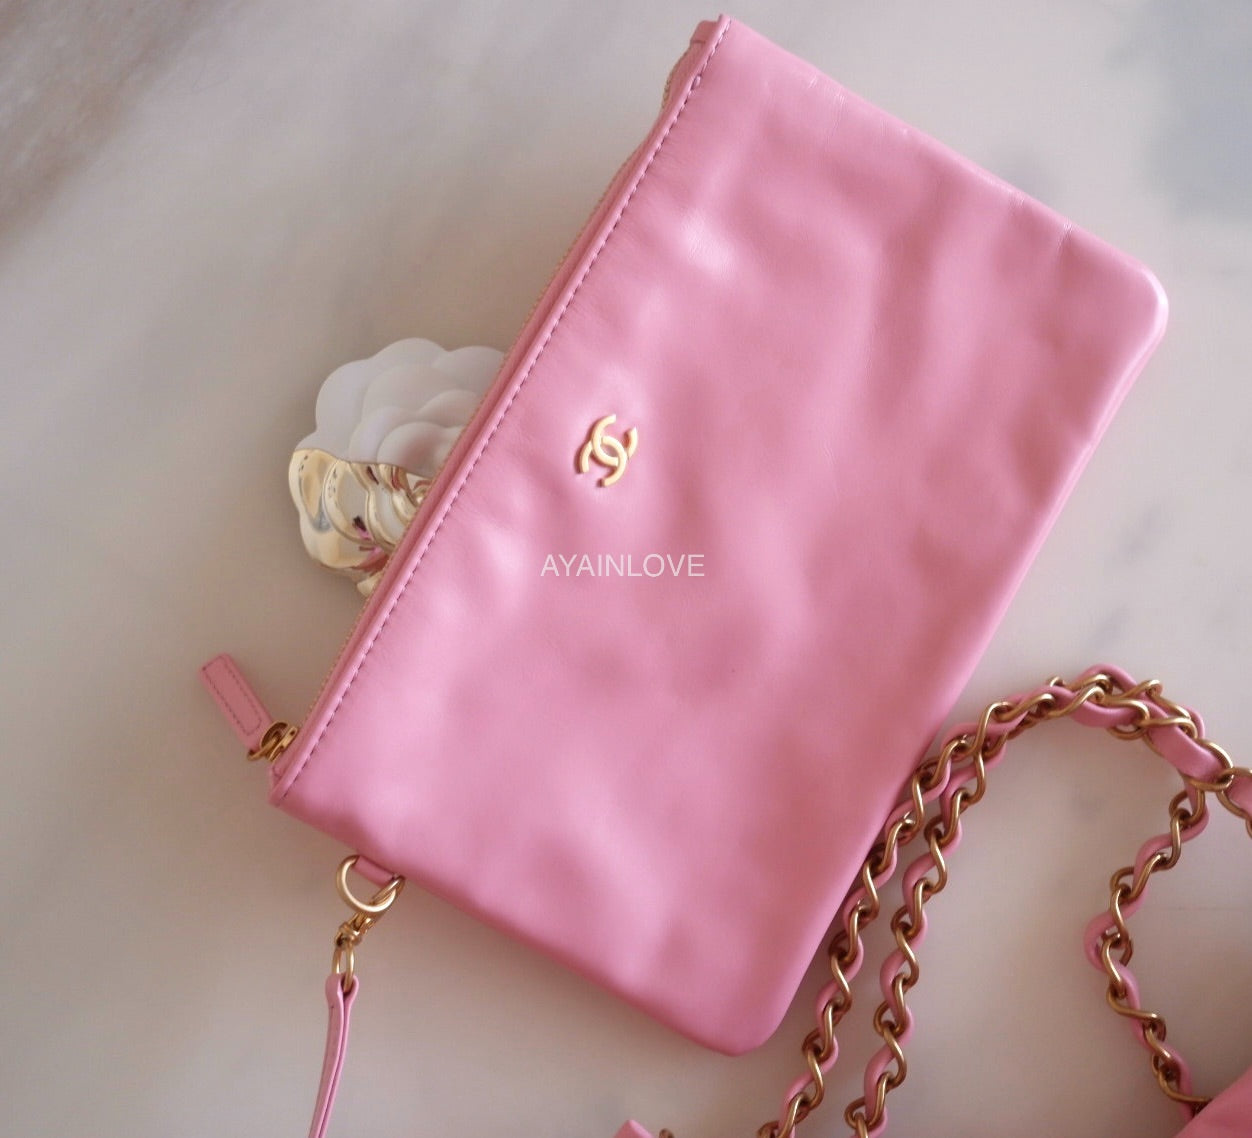 Chanel Vintage Pink Quilted Satin Clutch Gold Tone Hardware (Very Good), Womens Handbag